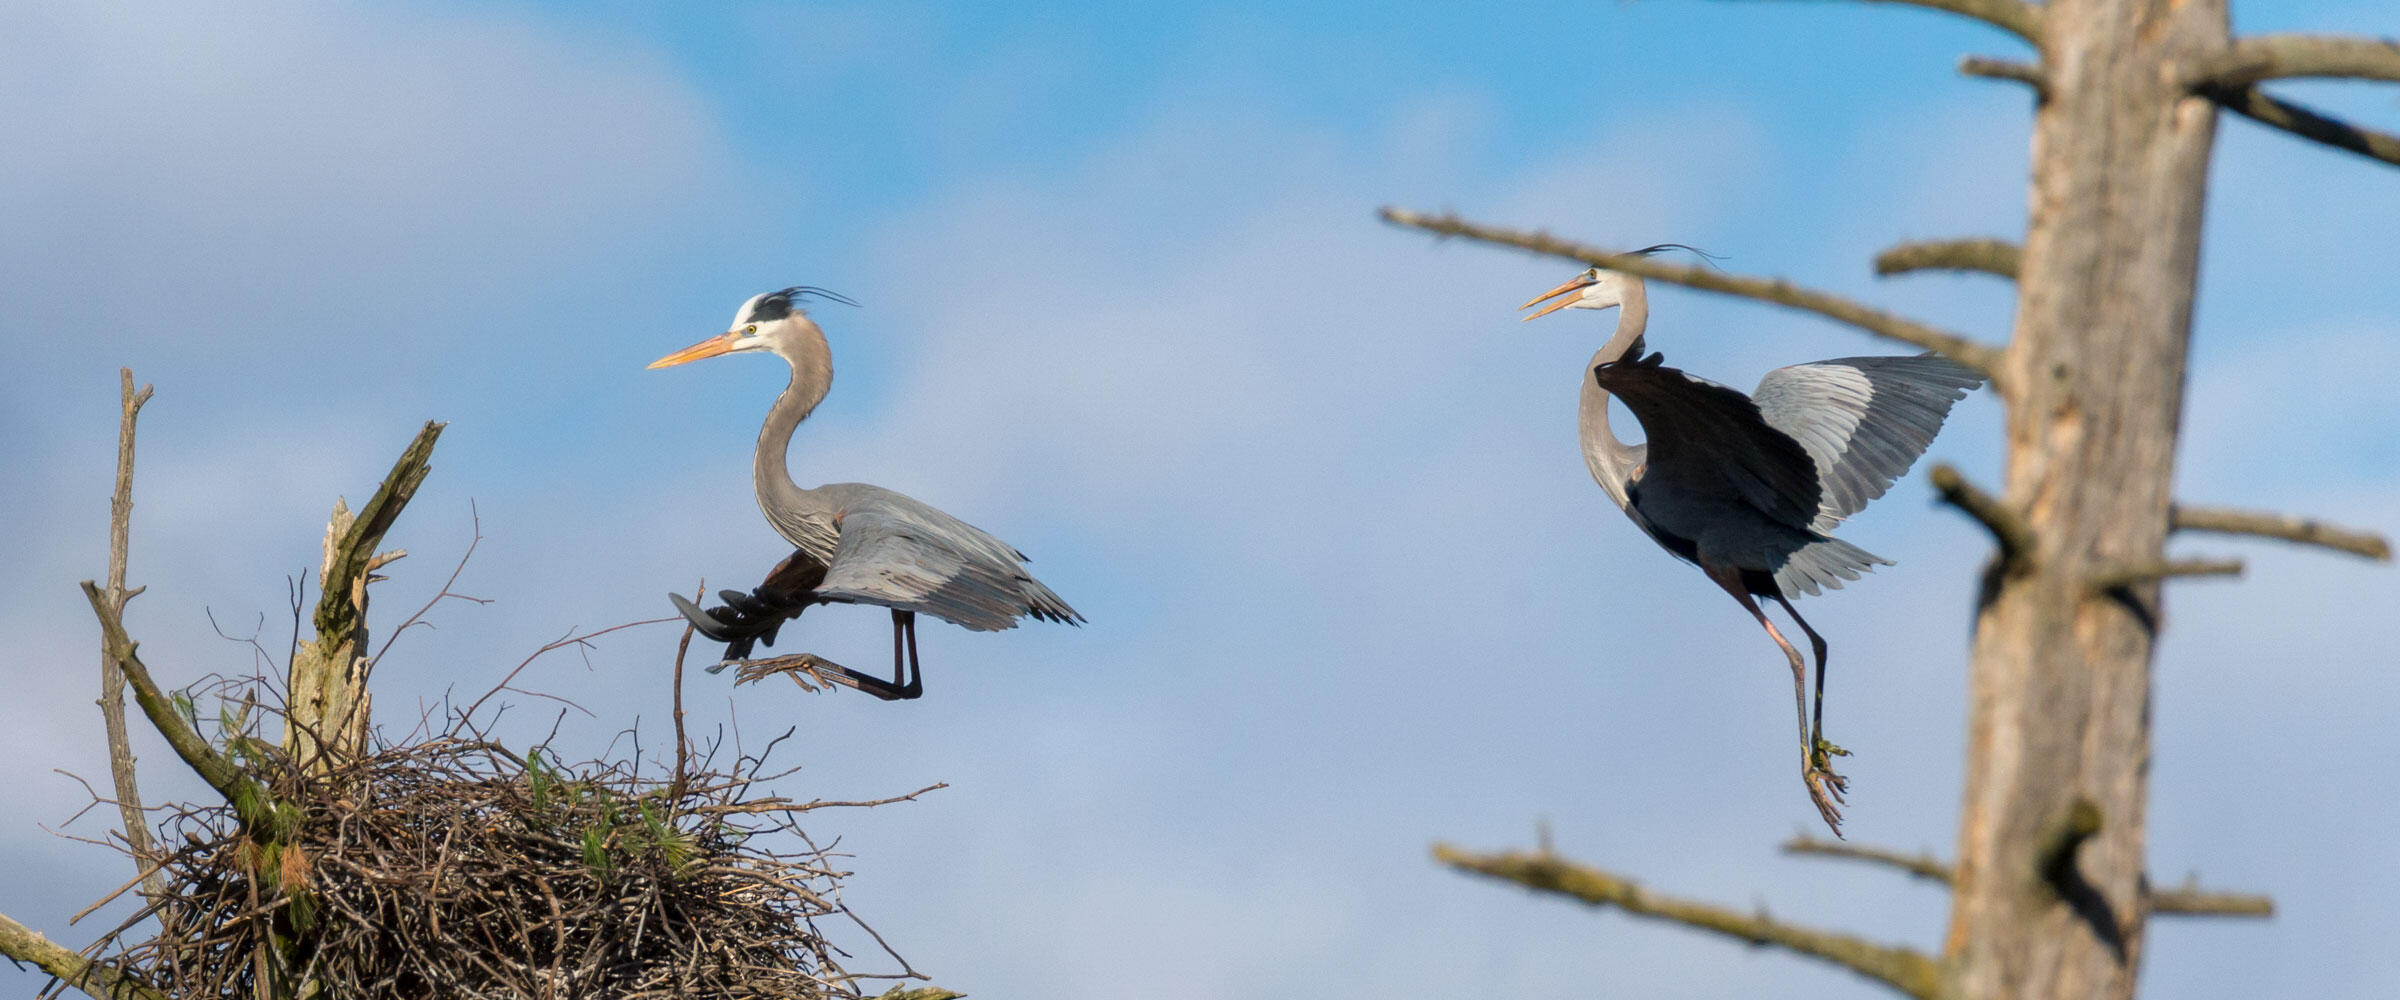 A pair of Great Blue Herons land in a nest.